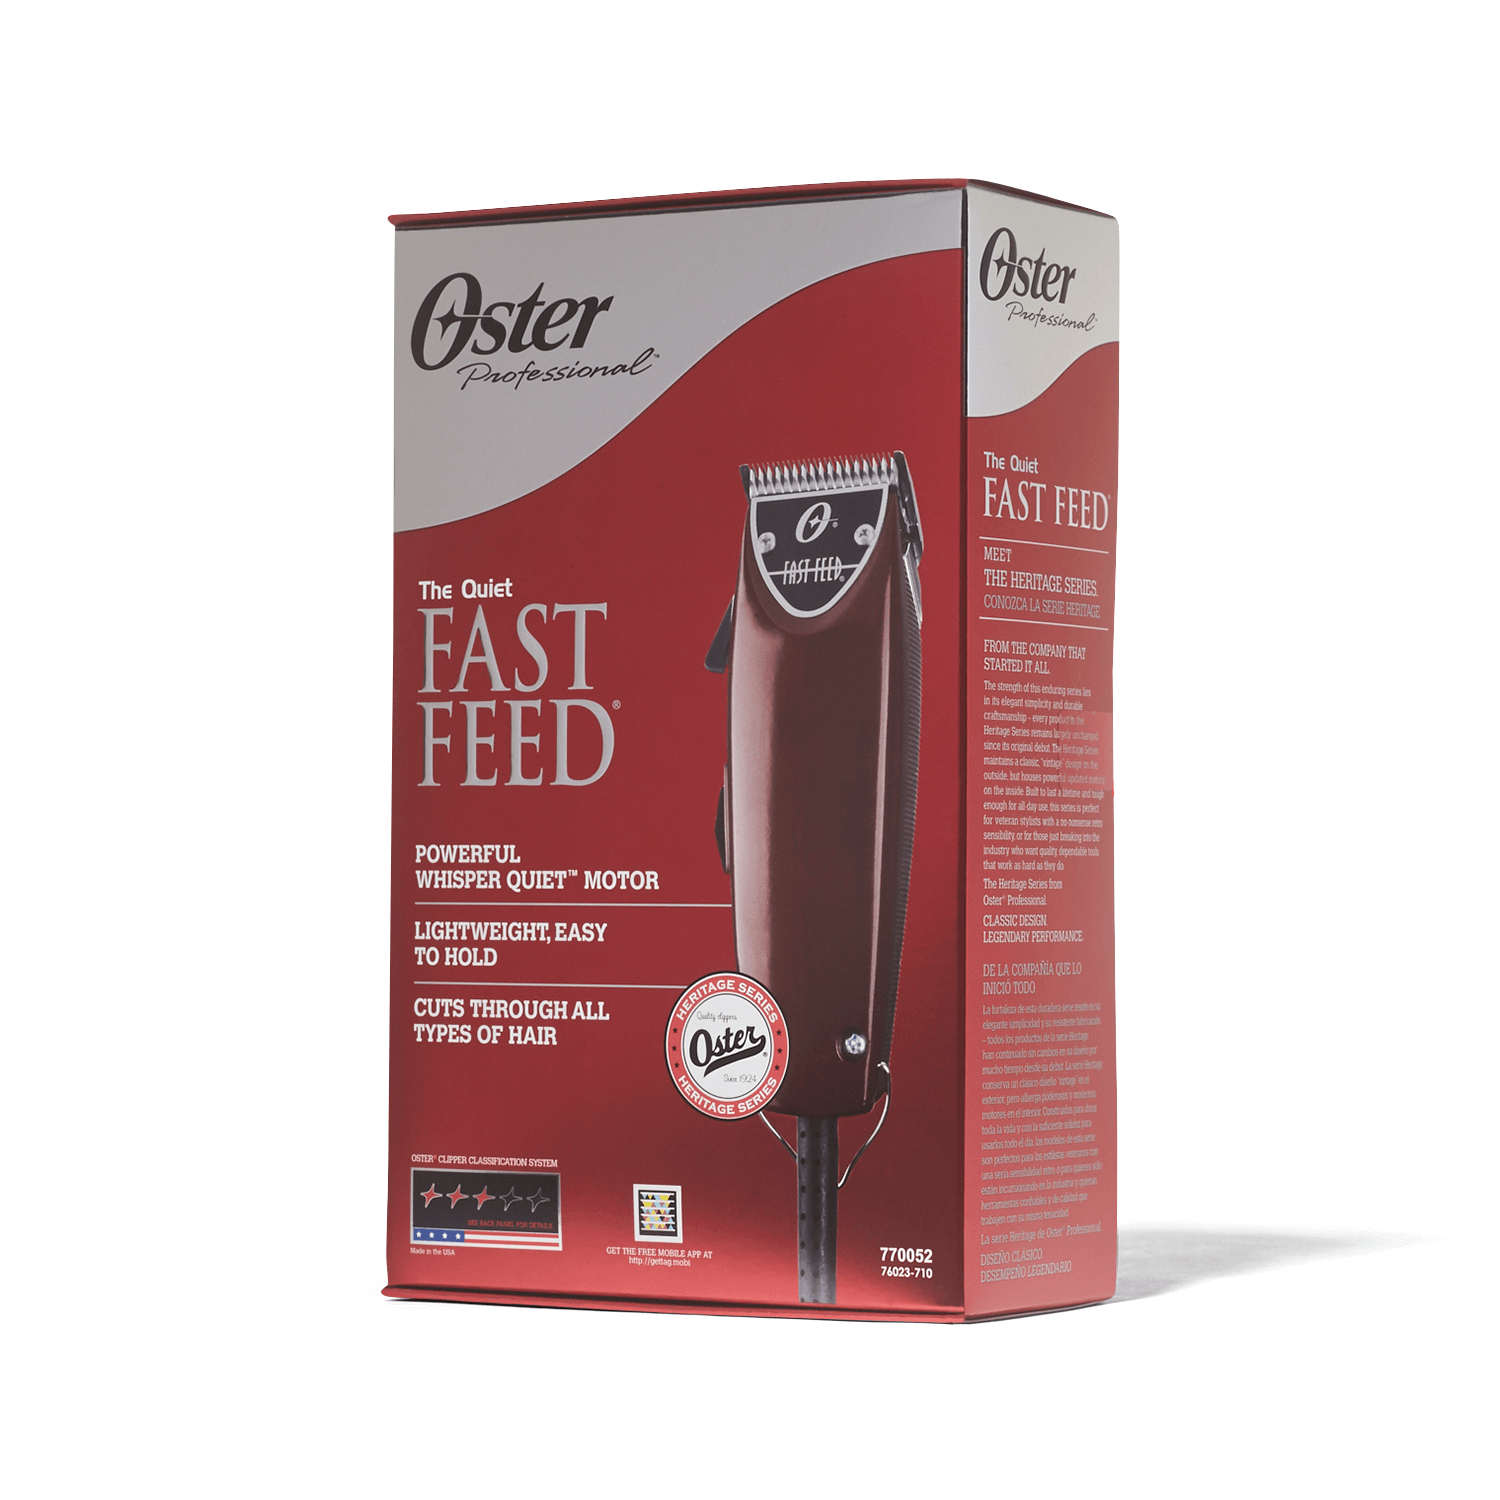 oster fast feed target